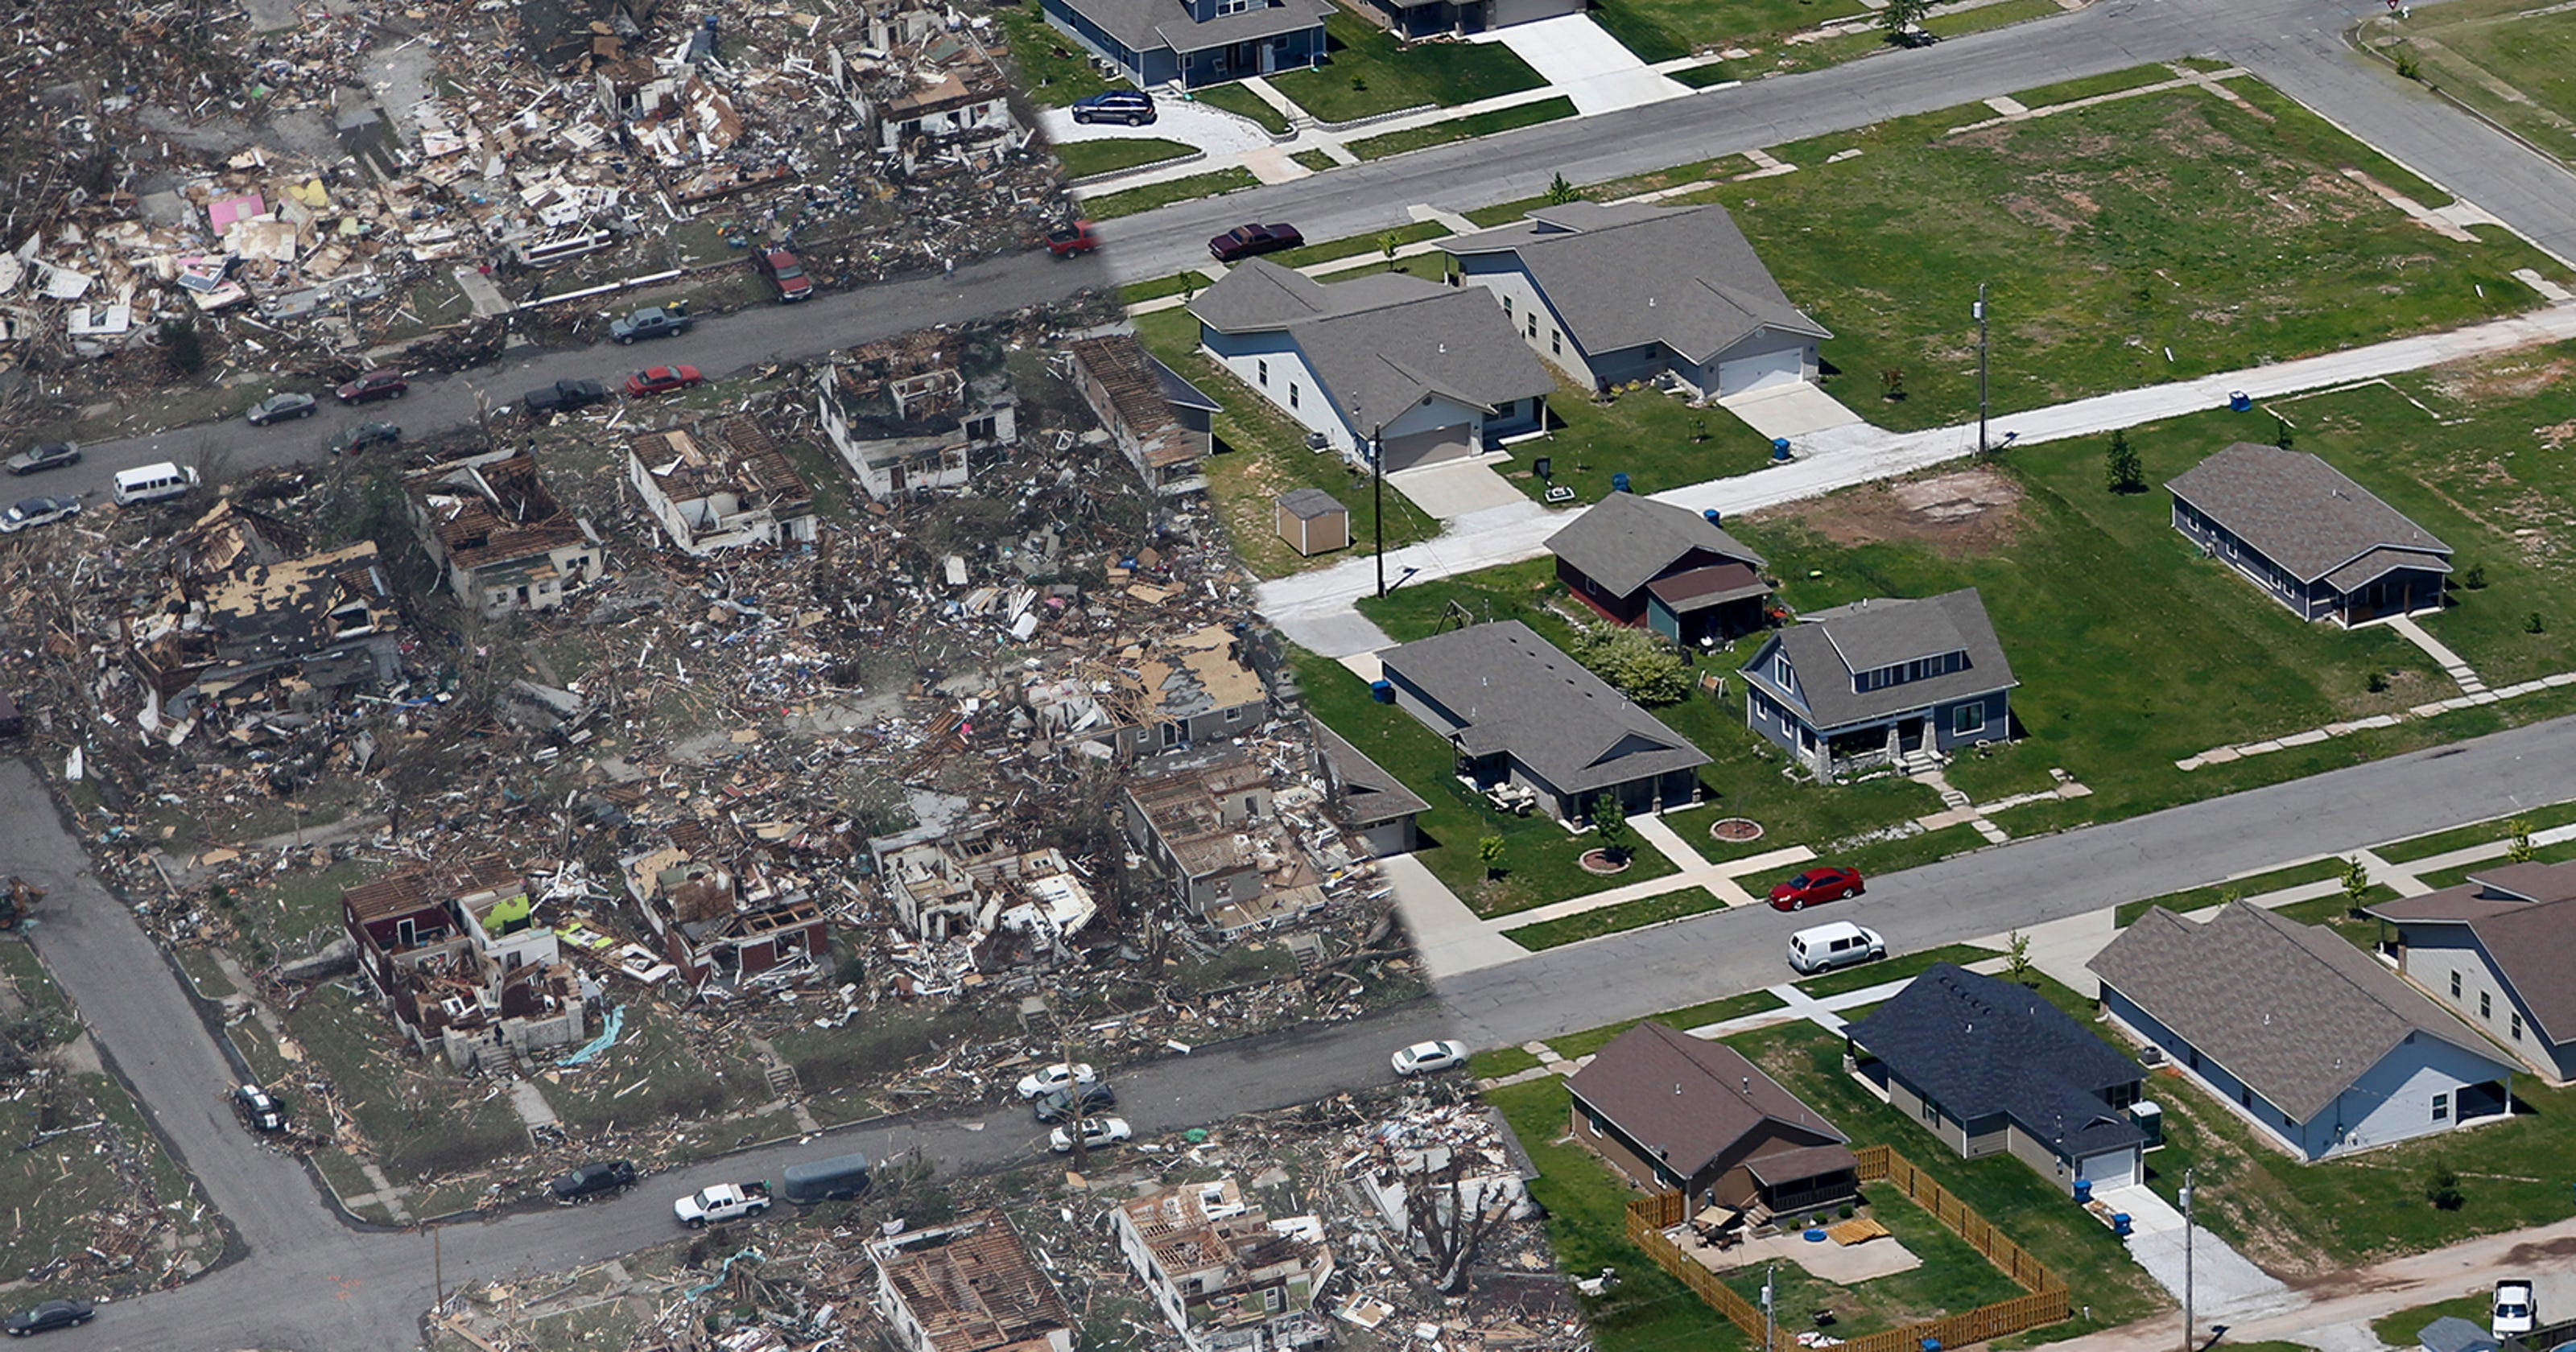 Joplin: Before and after photos